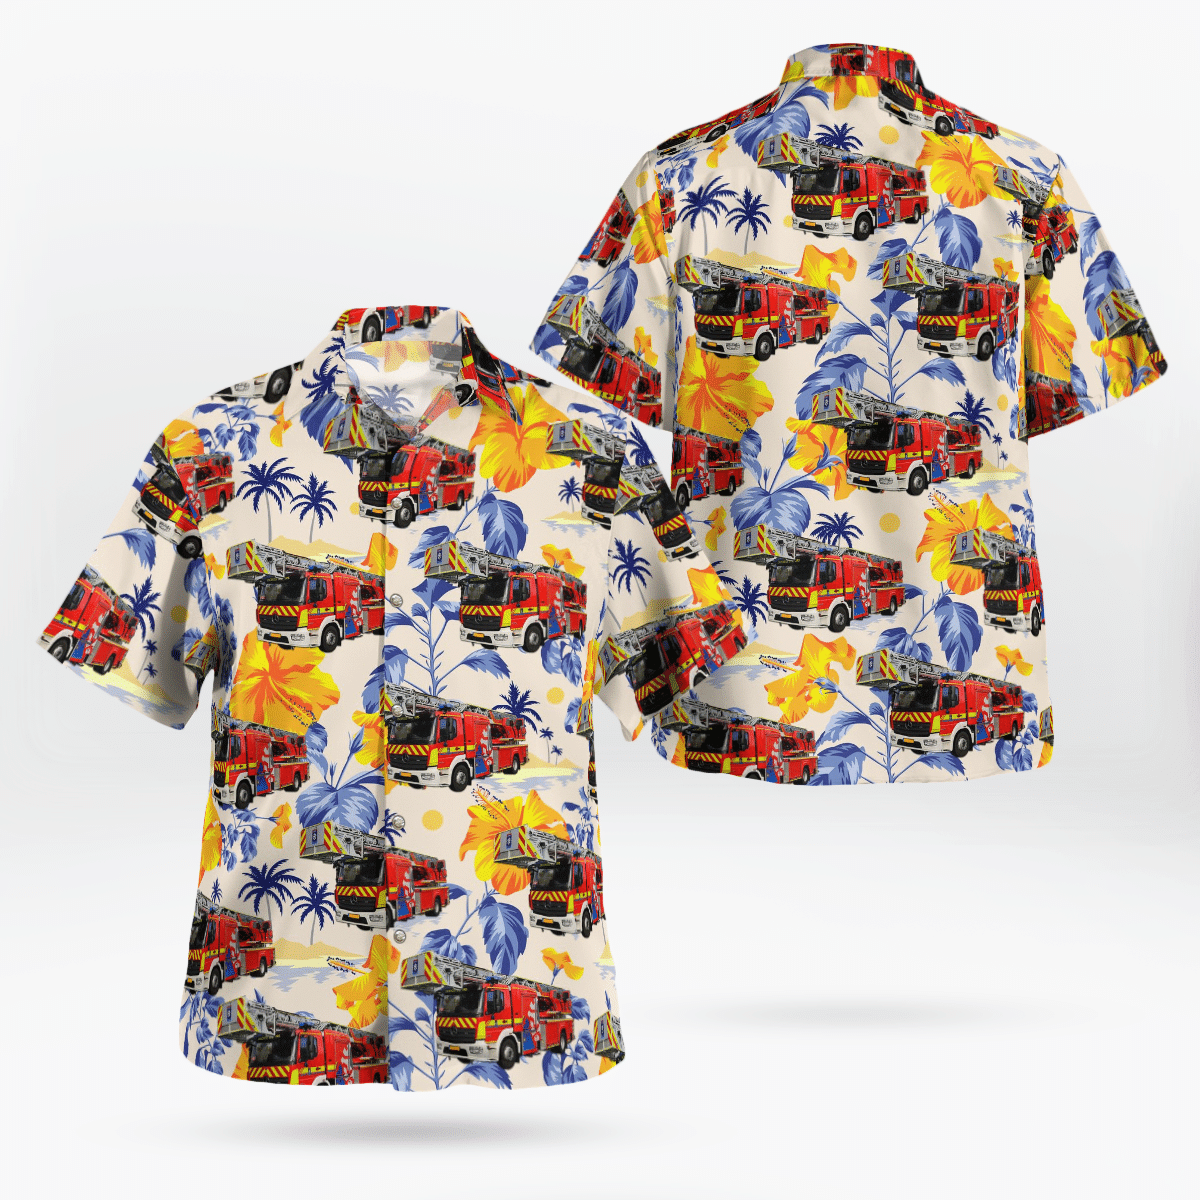 If you want to be noticed, wear These Trendy Hawaiian Shirt 95